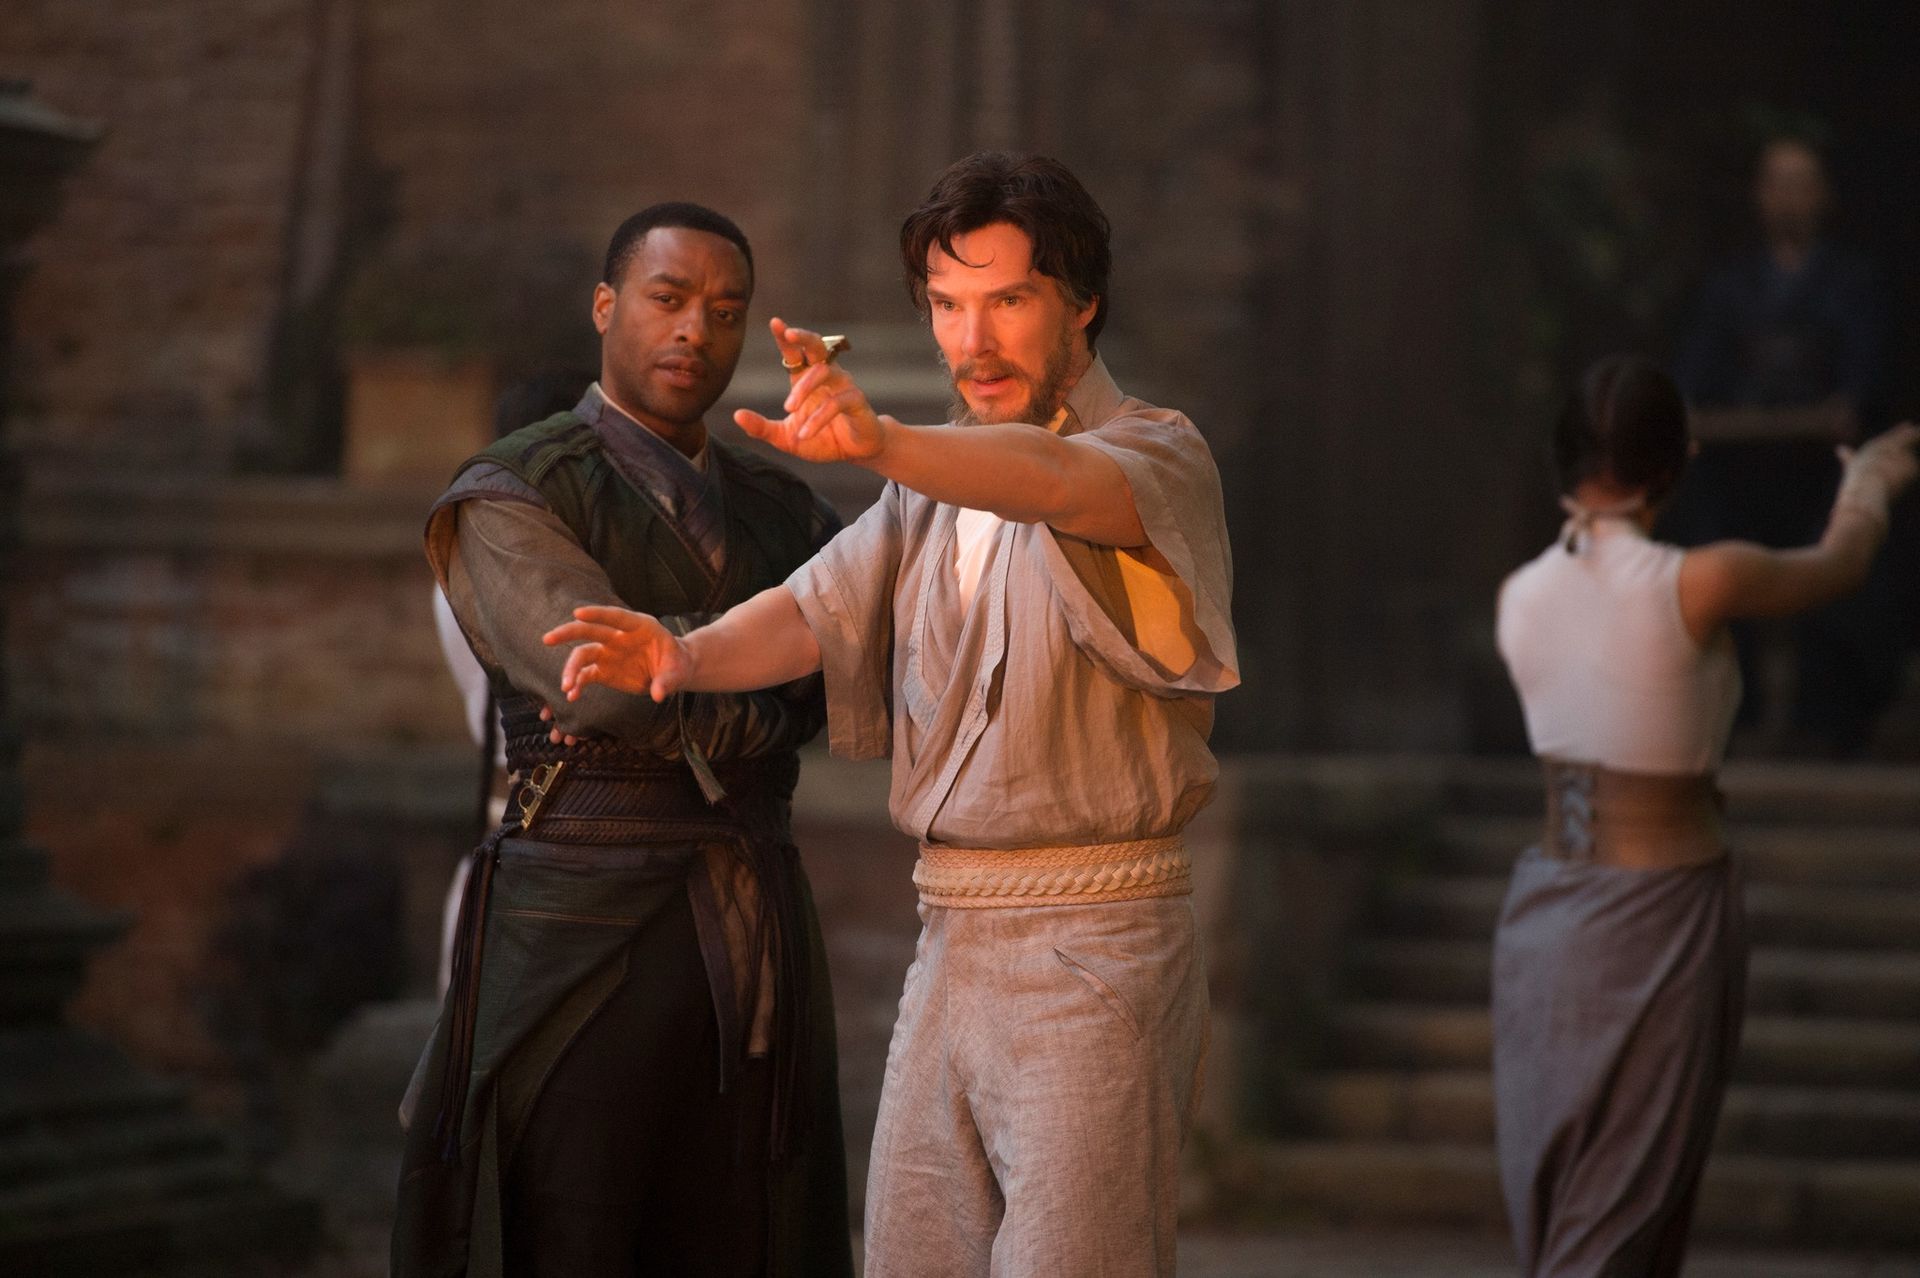 What to watch before Doctor Strange in the Multiverse of Madness